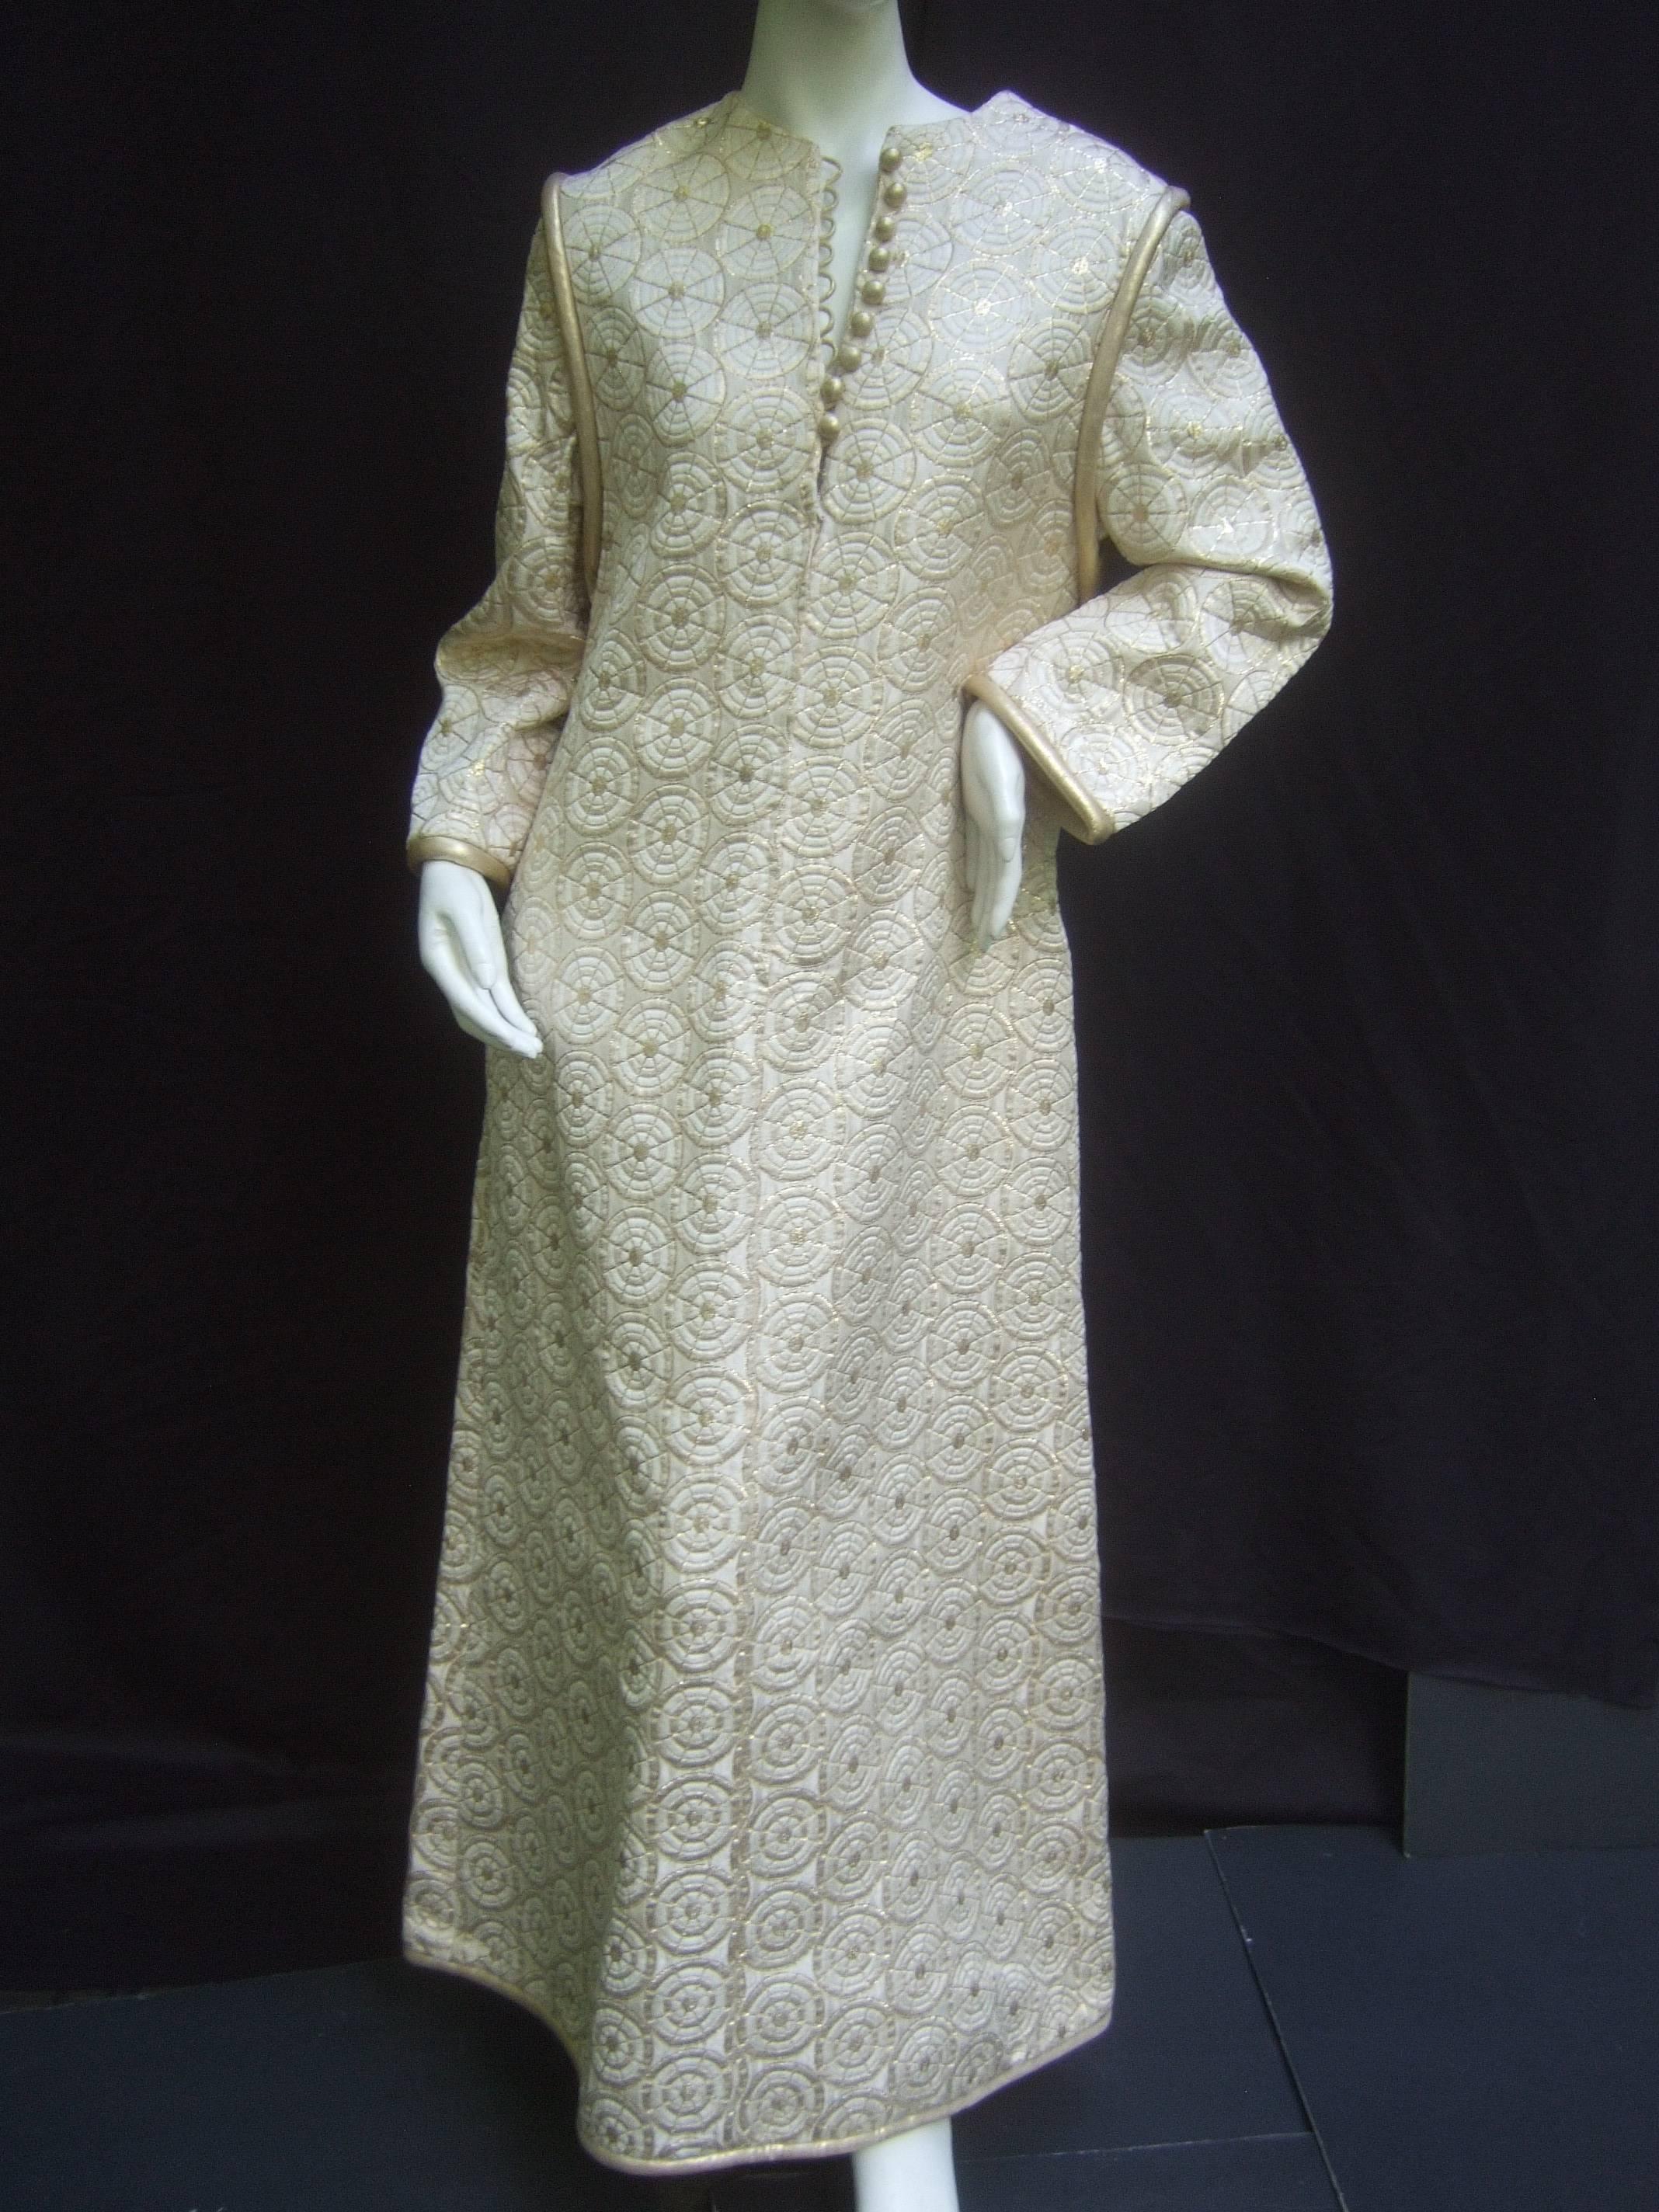 Incredibly elegant Malcolm Starr caftan of heavy brocaded creme fabric
enlivened with bullseye quilted patterns of golden metallic thread.
Two seamed pockets on either side and fully lined in a soft silky fabric.
Space age style piping at the